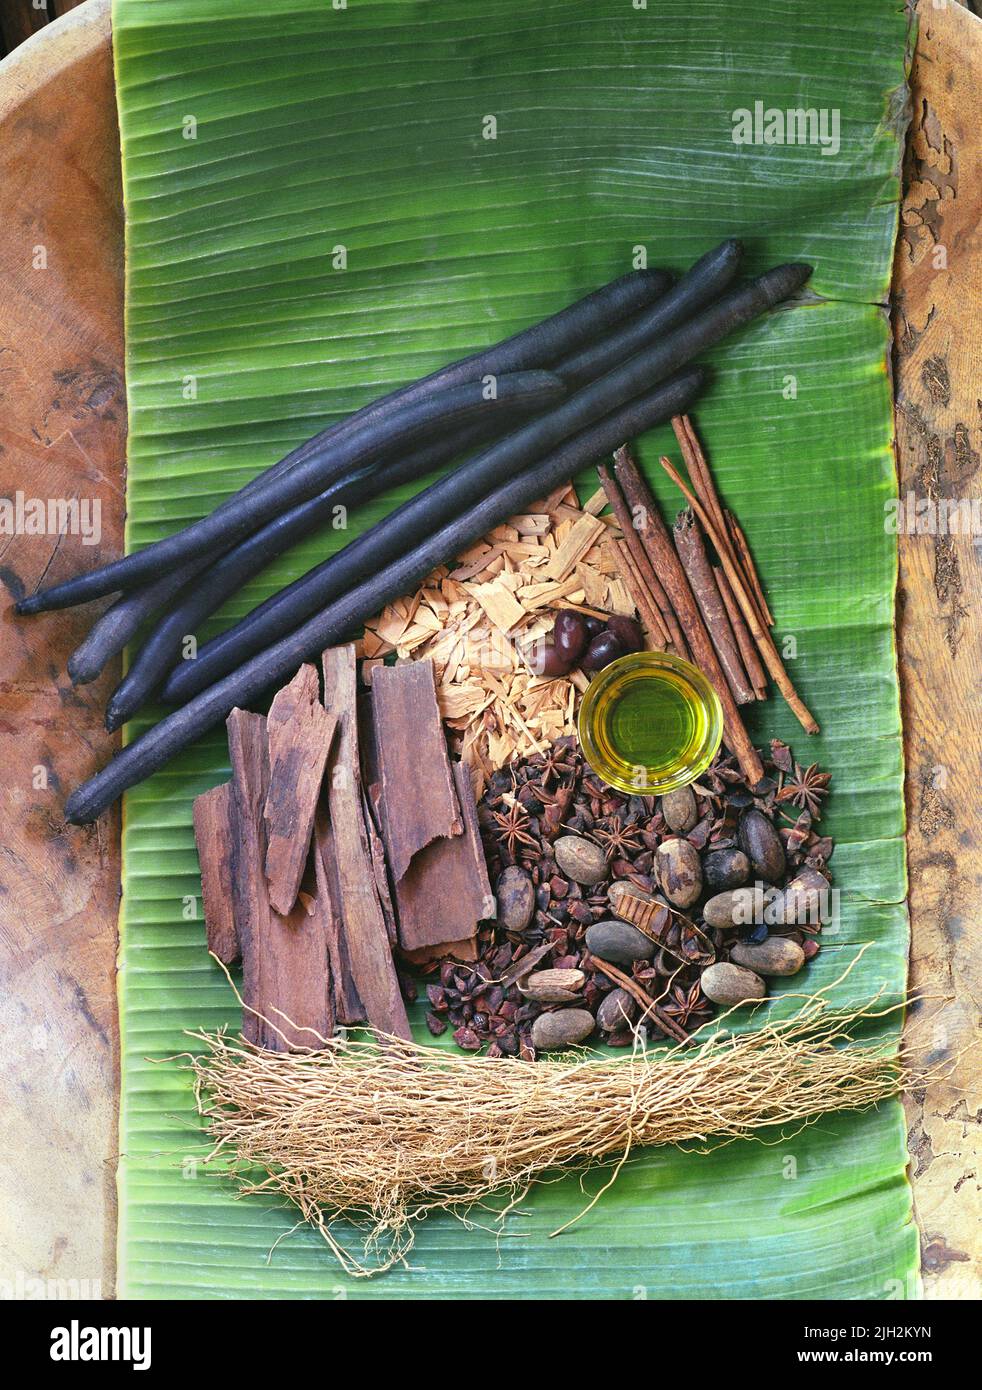 Raw ingredients for Aromatherapy at a spa in the Philippines. Stock Photo